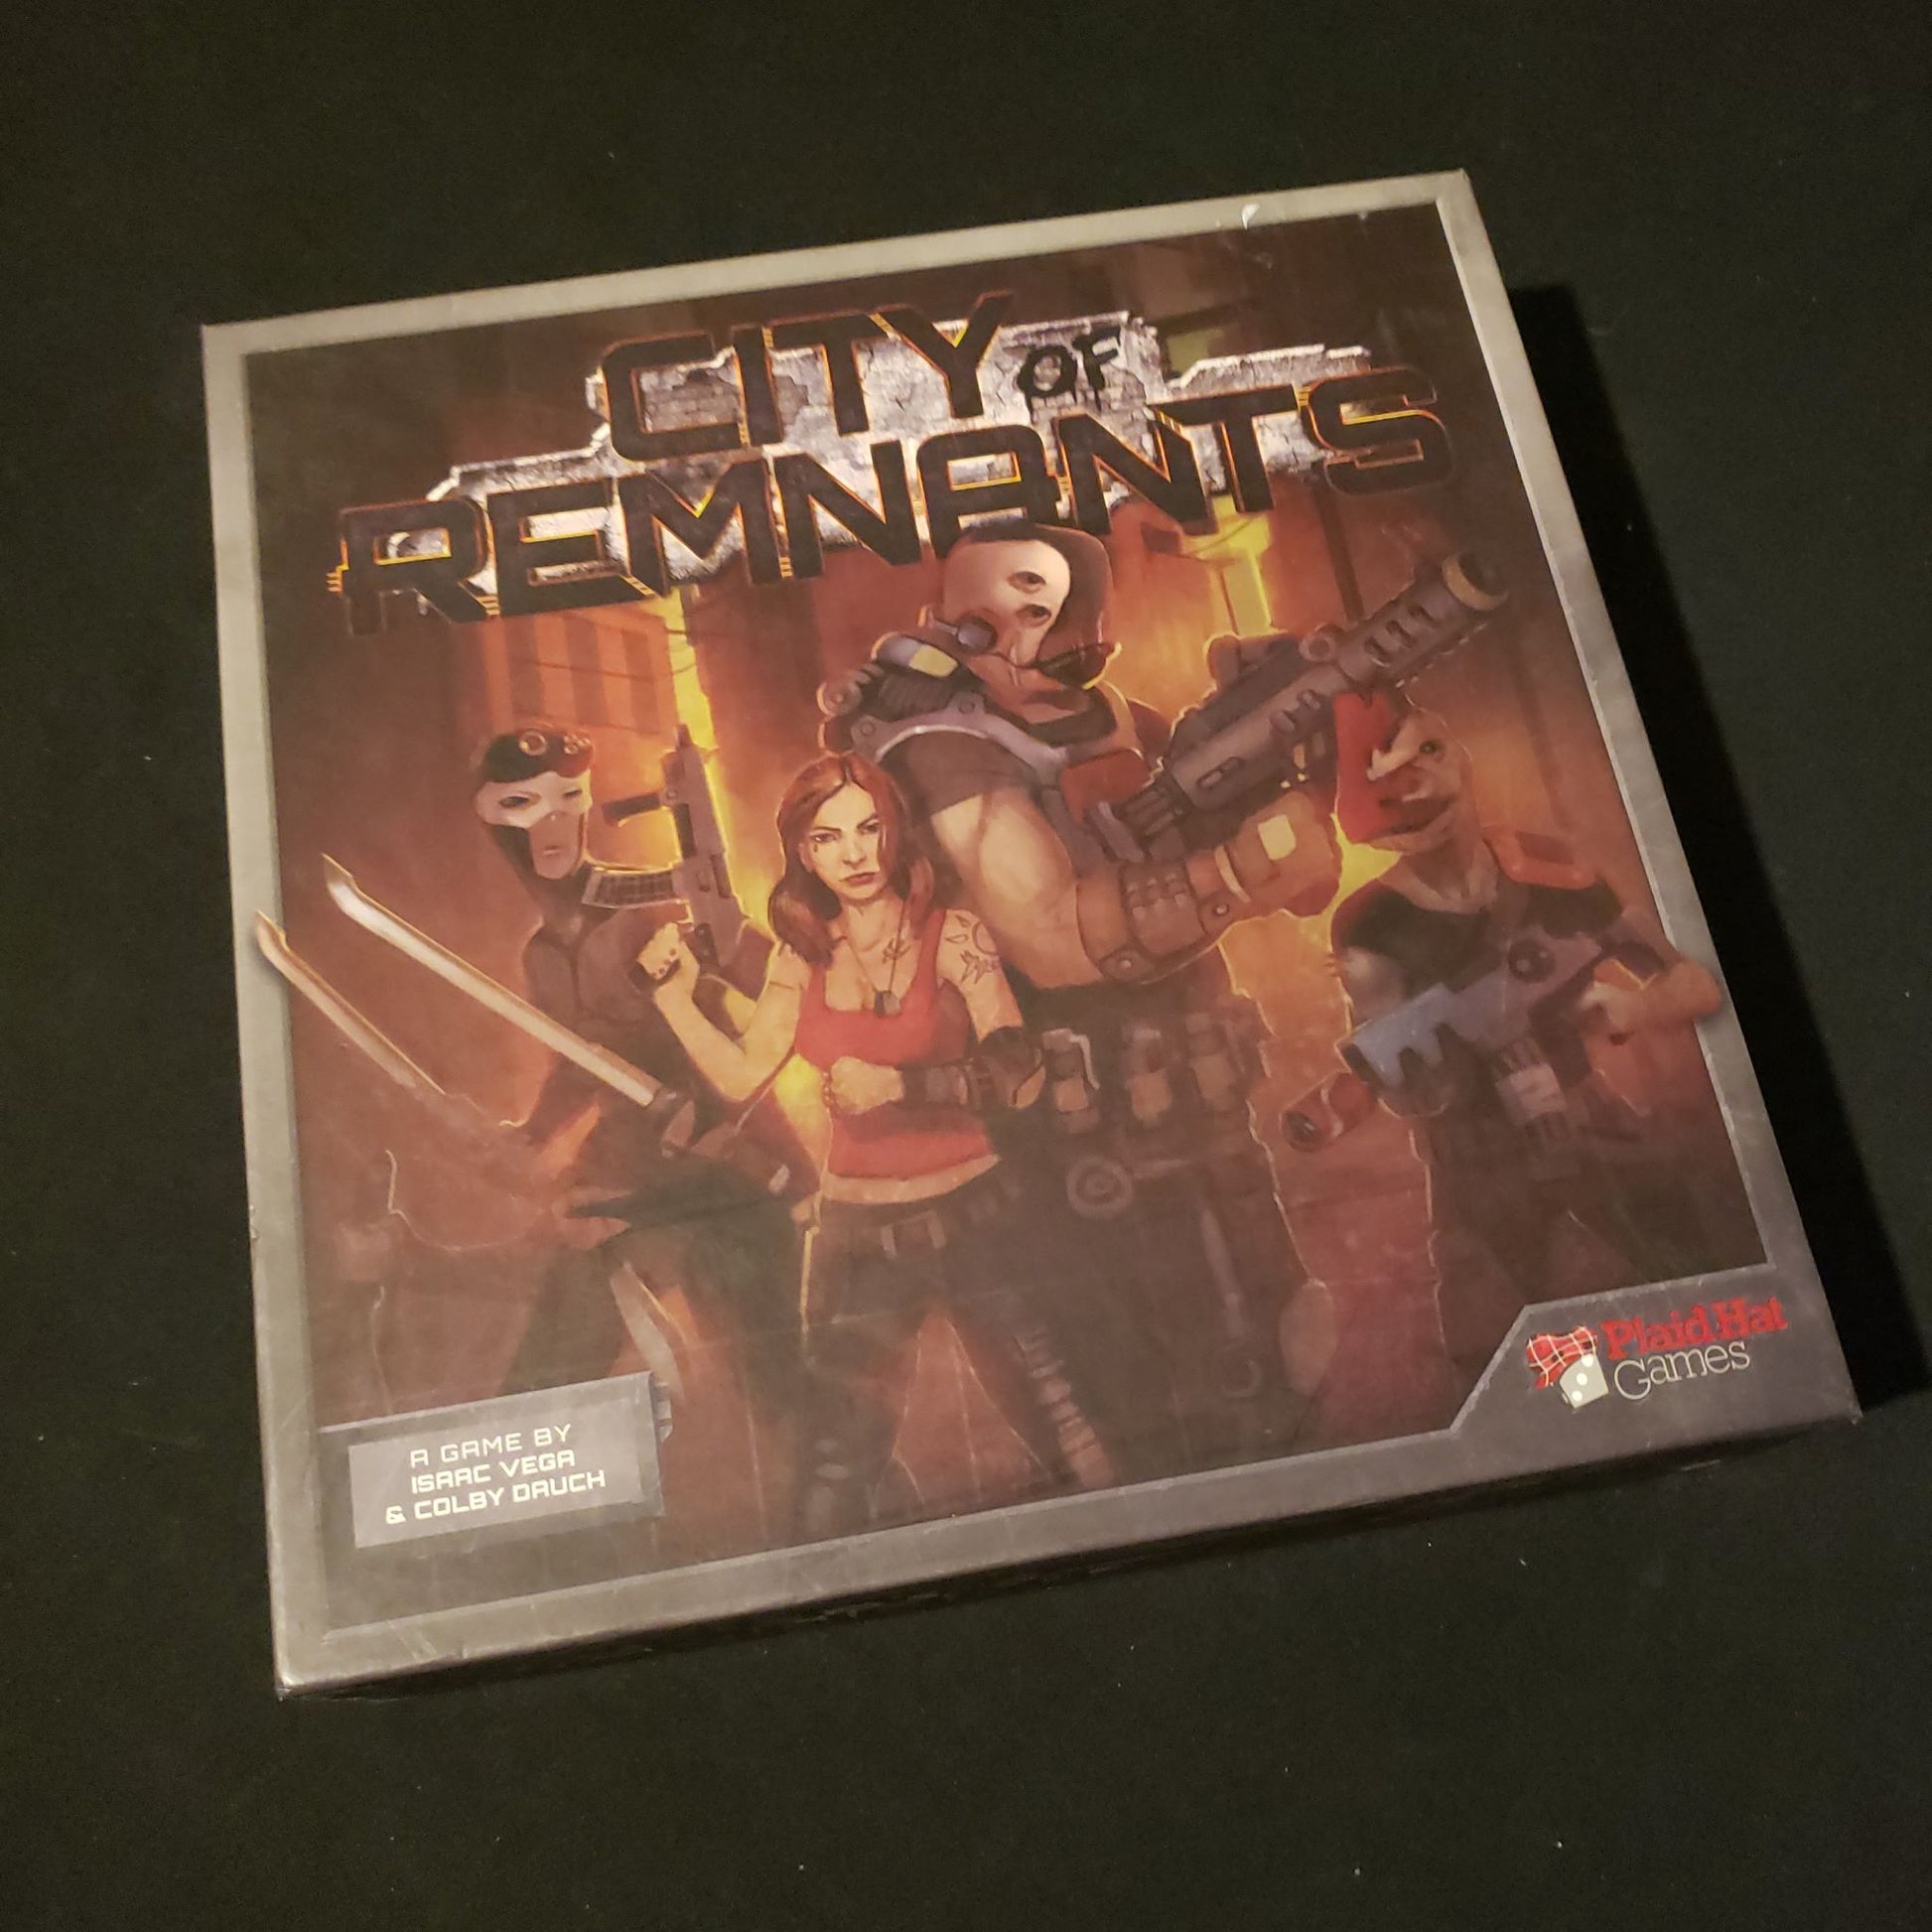 Image shows the front cover of the box of the City of Remnants board game